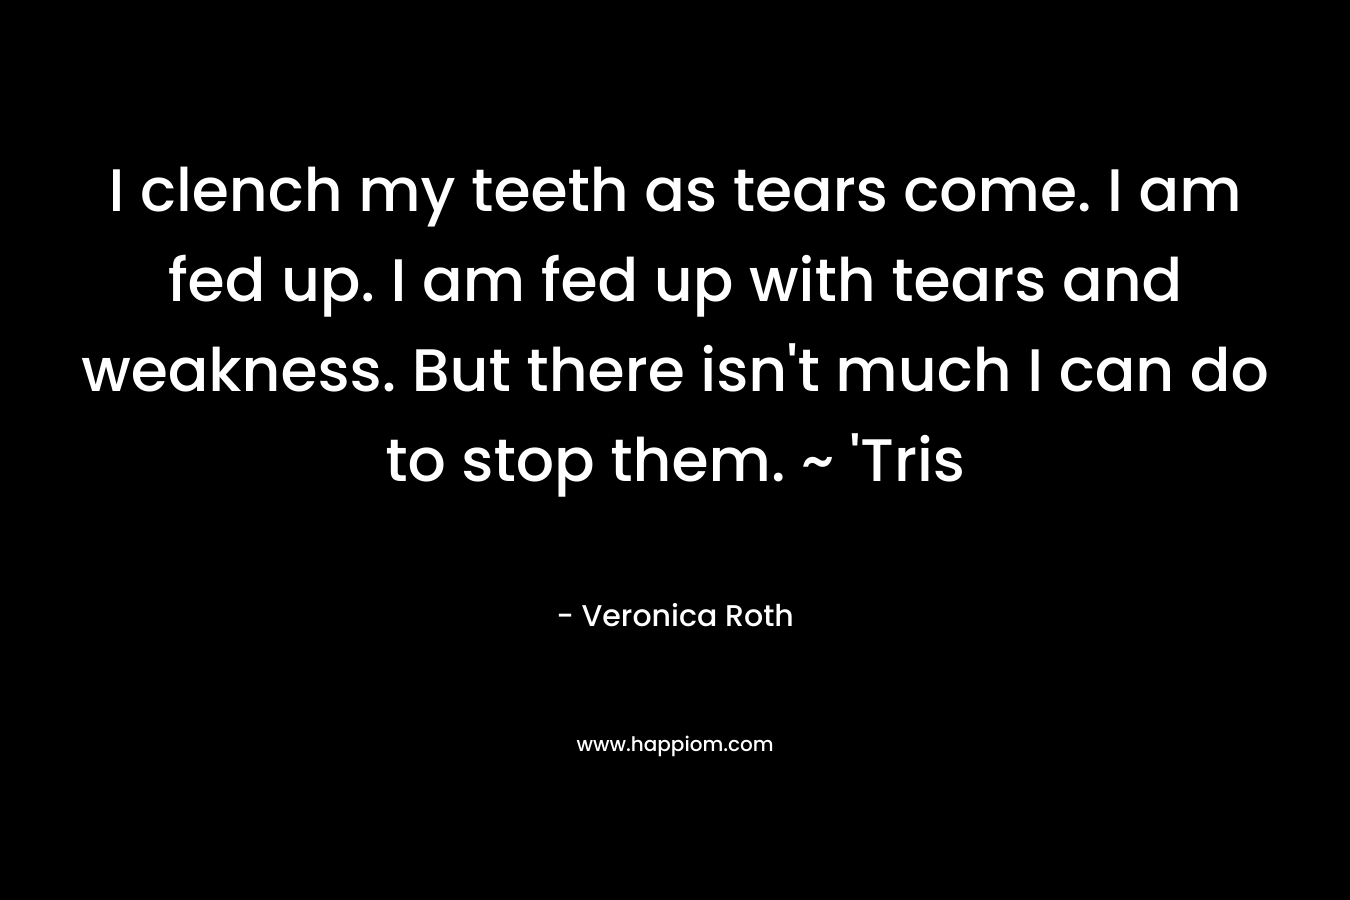 I clench my teeth as tears come. I am fed up. I am fed up with tears and weakness. But there isn't much I can do to stop them. ~ 'Tris